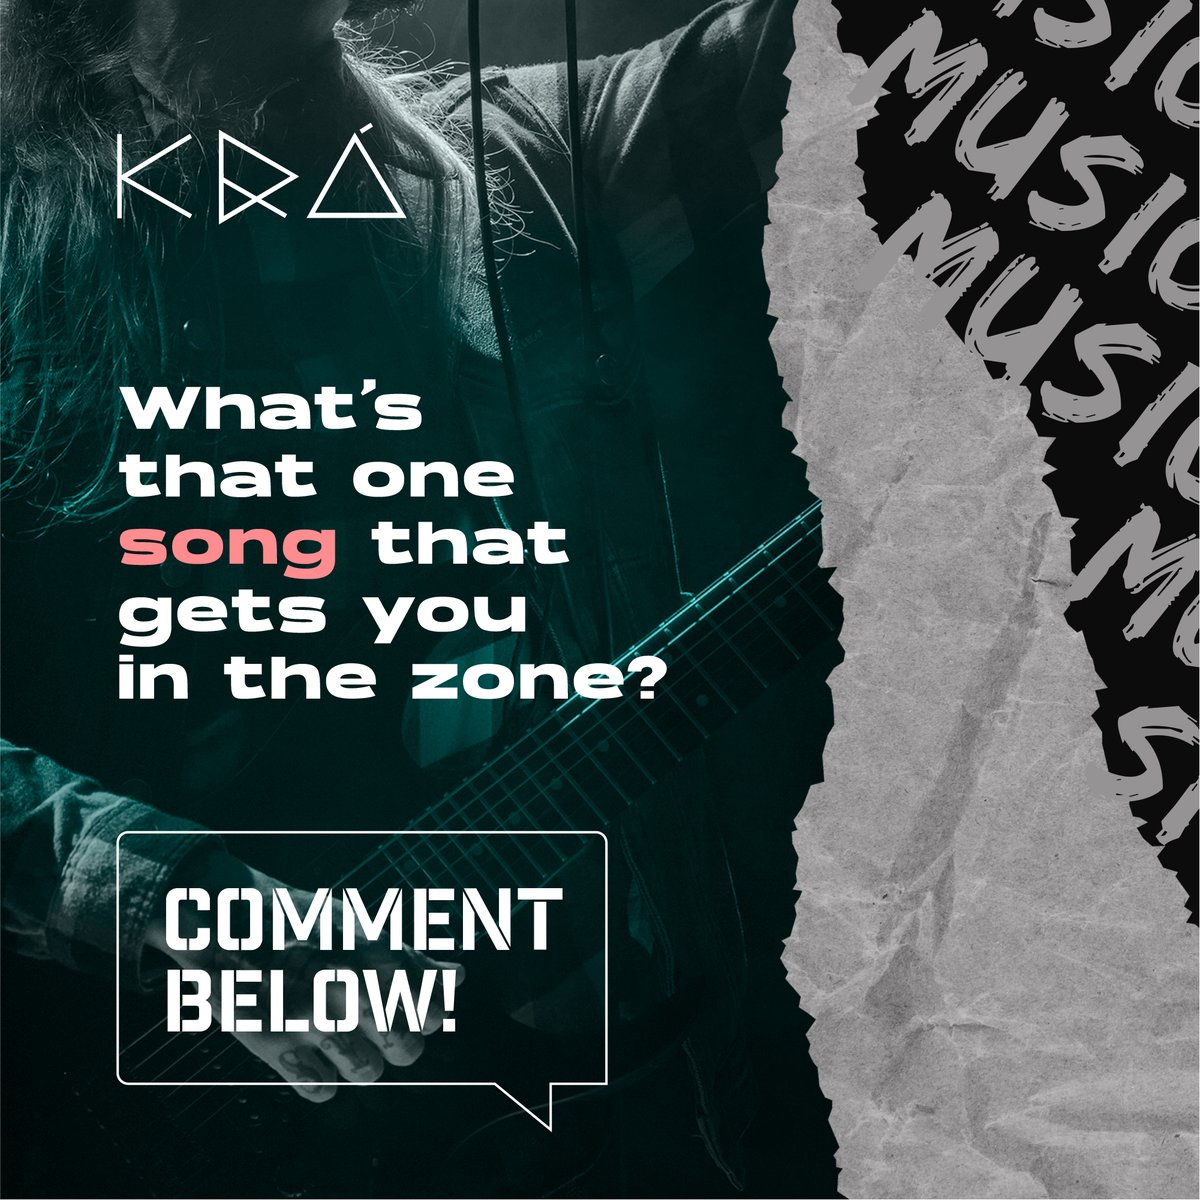 Everyone's got a go-to track - one that helps them pause the world and start creating. Hit up the comment section and let us know yours.
.
.
.
.
#YouDoYou #Krasified #indianstreetwear #streetculture #streetwear #casualwear #KRA #hiphopindia #indiasfinesthiphop #MusicCulture